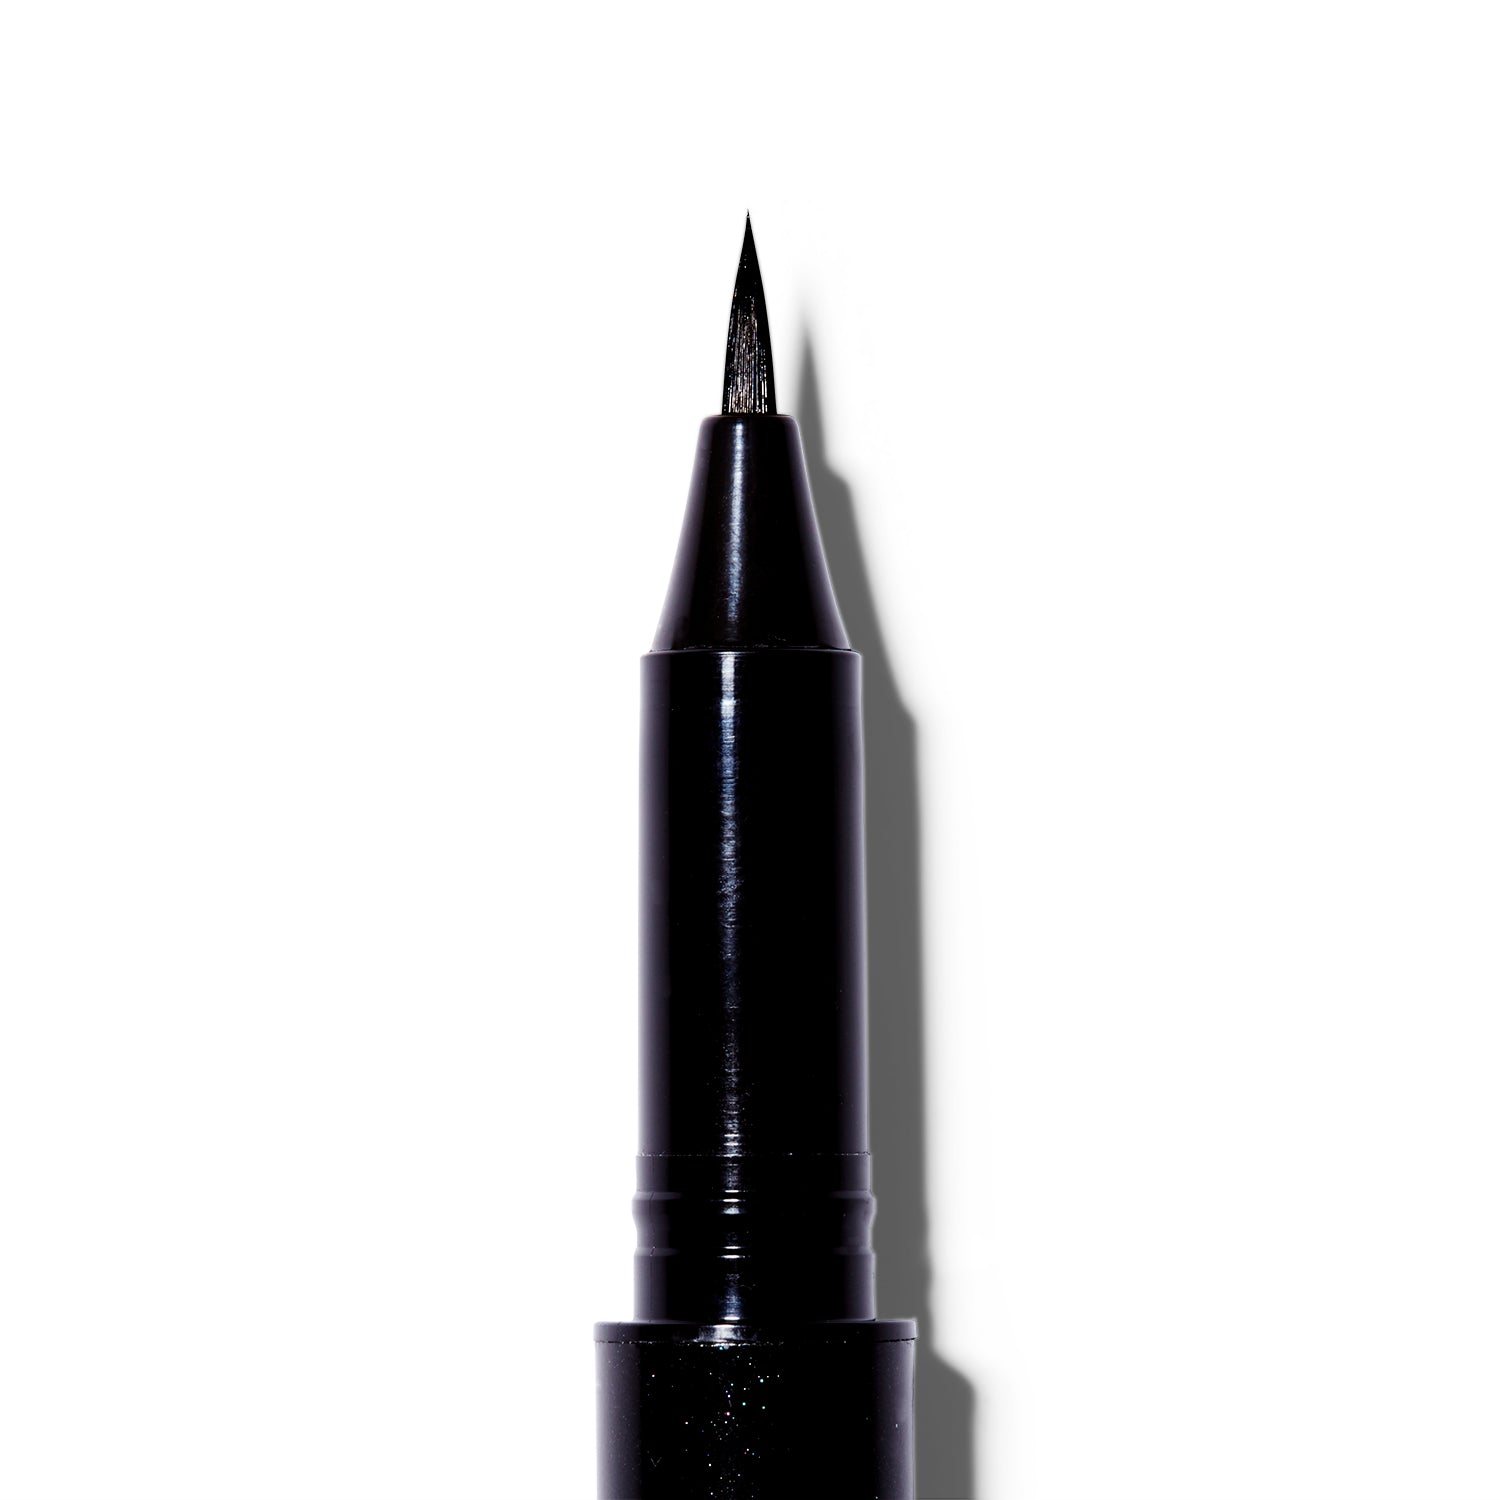  A close up of the Surratt Autographique Liquid Eyeliner in Chat Noir, a deep black. The pen is made of individual hairs and goes to a sharp point.